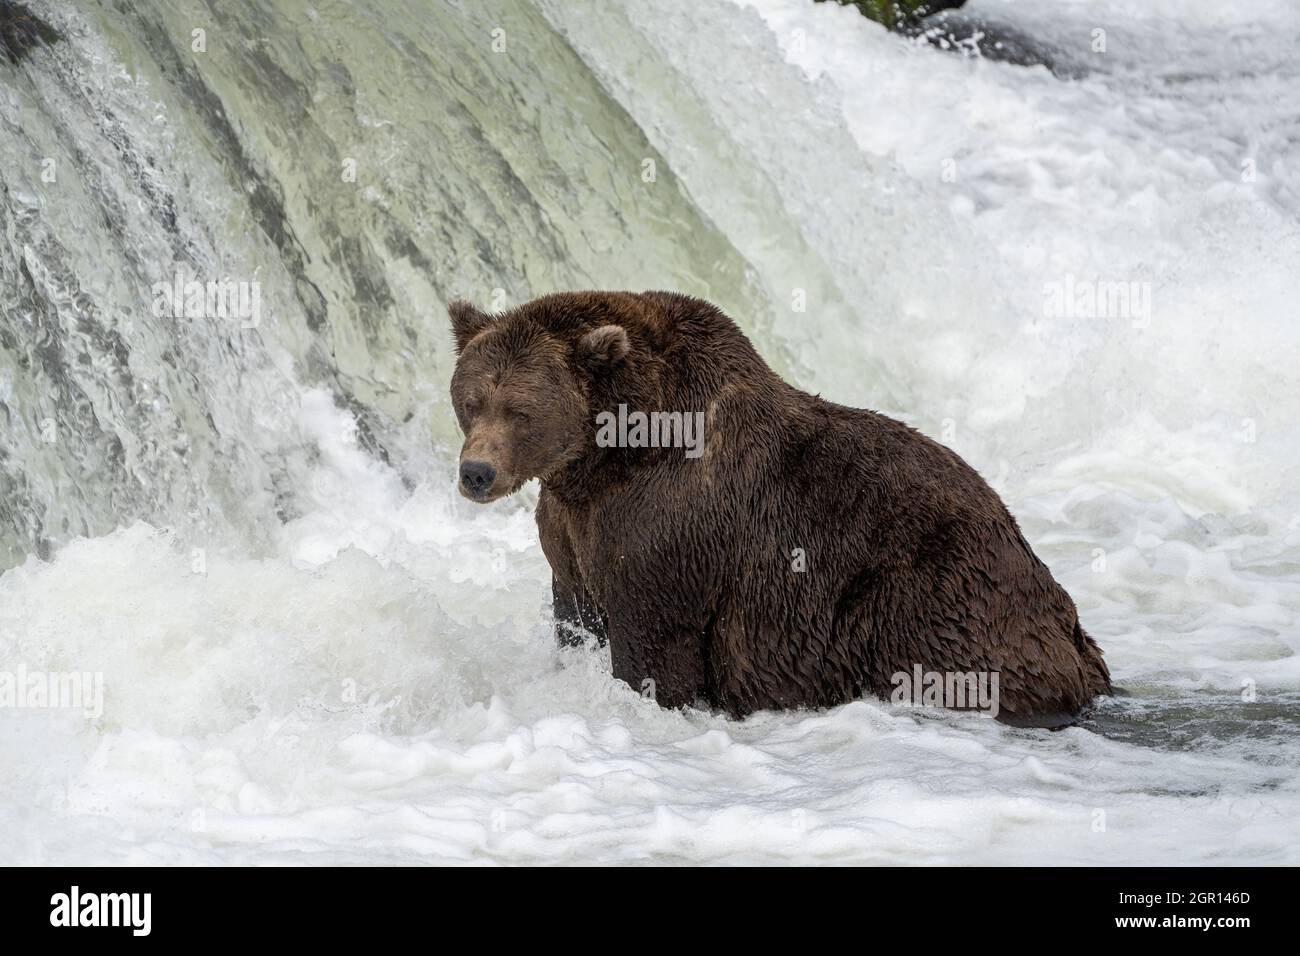 An adult Brown Bear known as Popeye 634 watches for a Sockeye Salmon at Brooks Falls in Katmai National Park and Preserve September 14, 2021 near King Salmon, Alaska. The park is holding the annual Fat Bear contest to decide which bear gained the most weight during the summer feeding season. Stock Photo